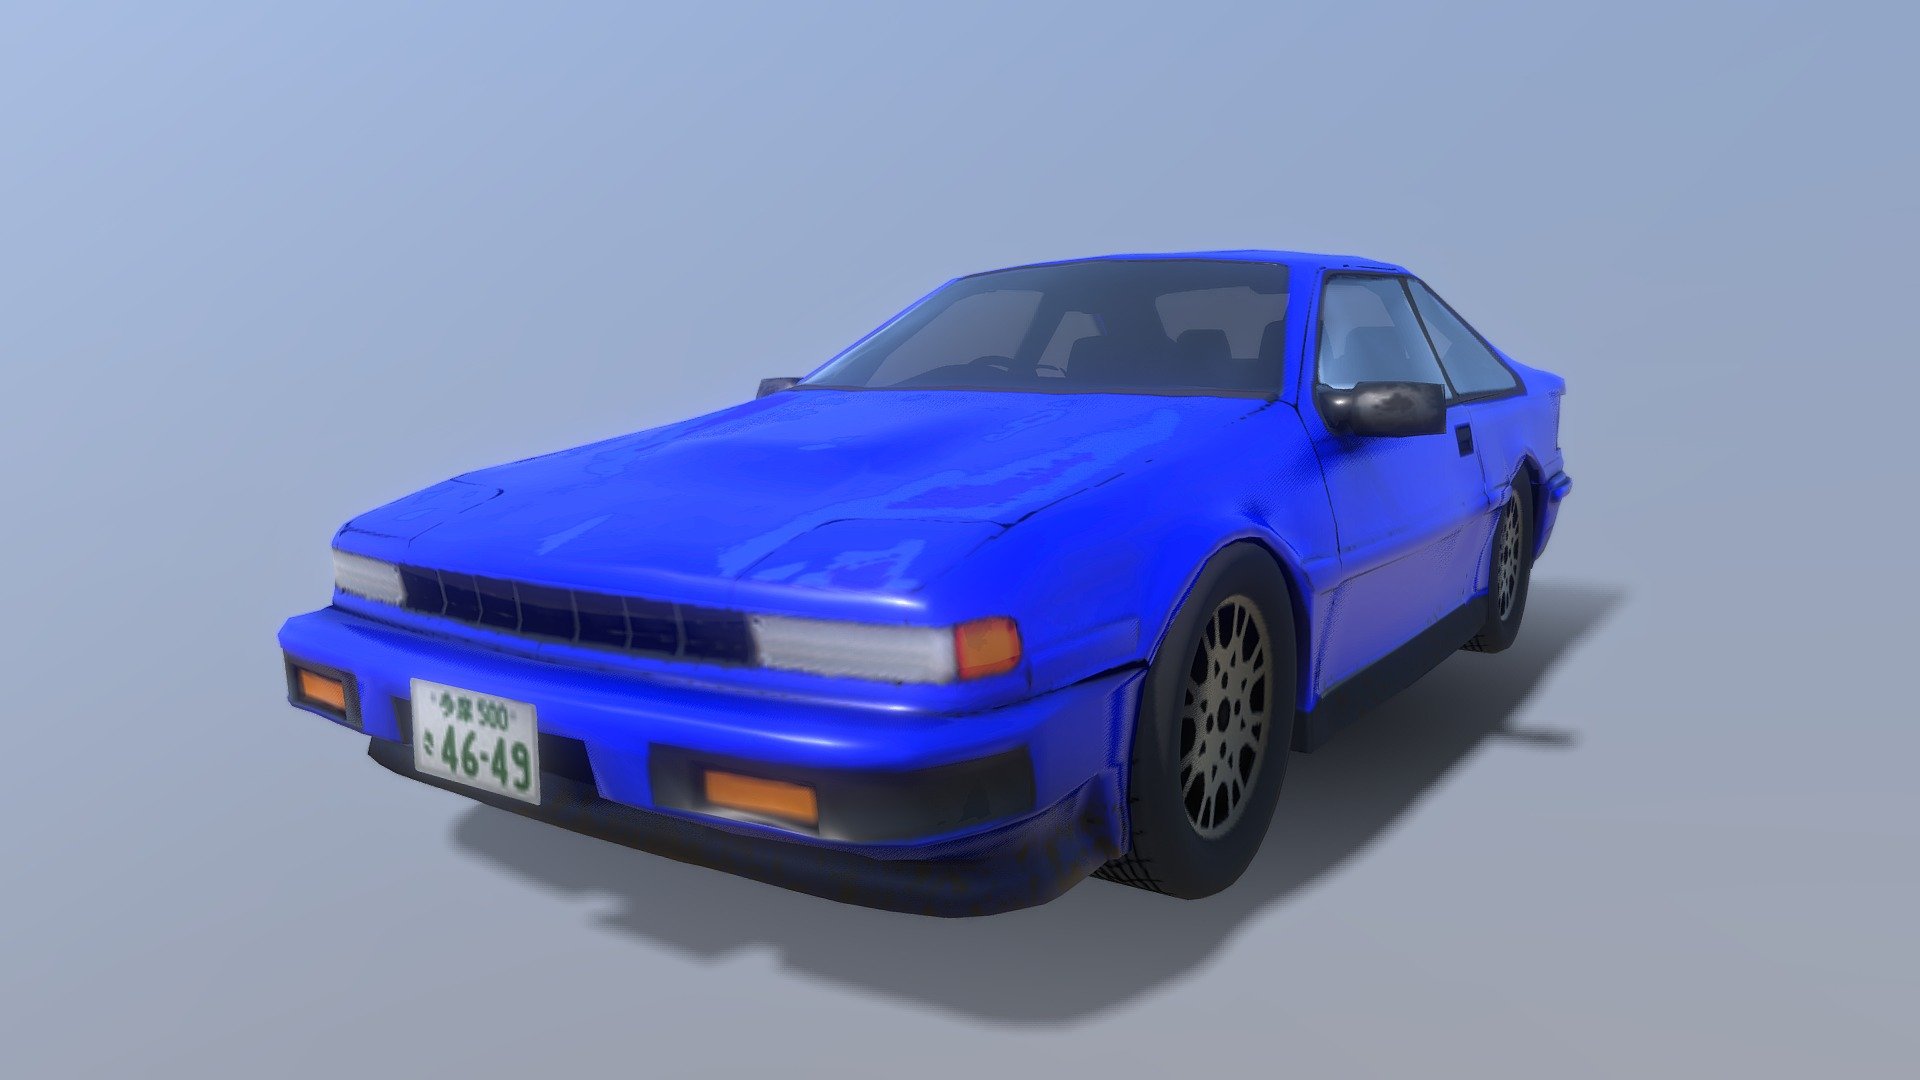 My attempt to make an average unkept car. Exterior texturing and modeling all done by me 3d model